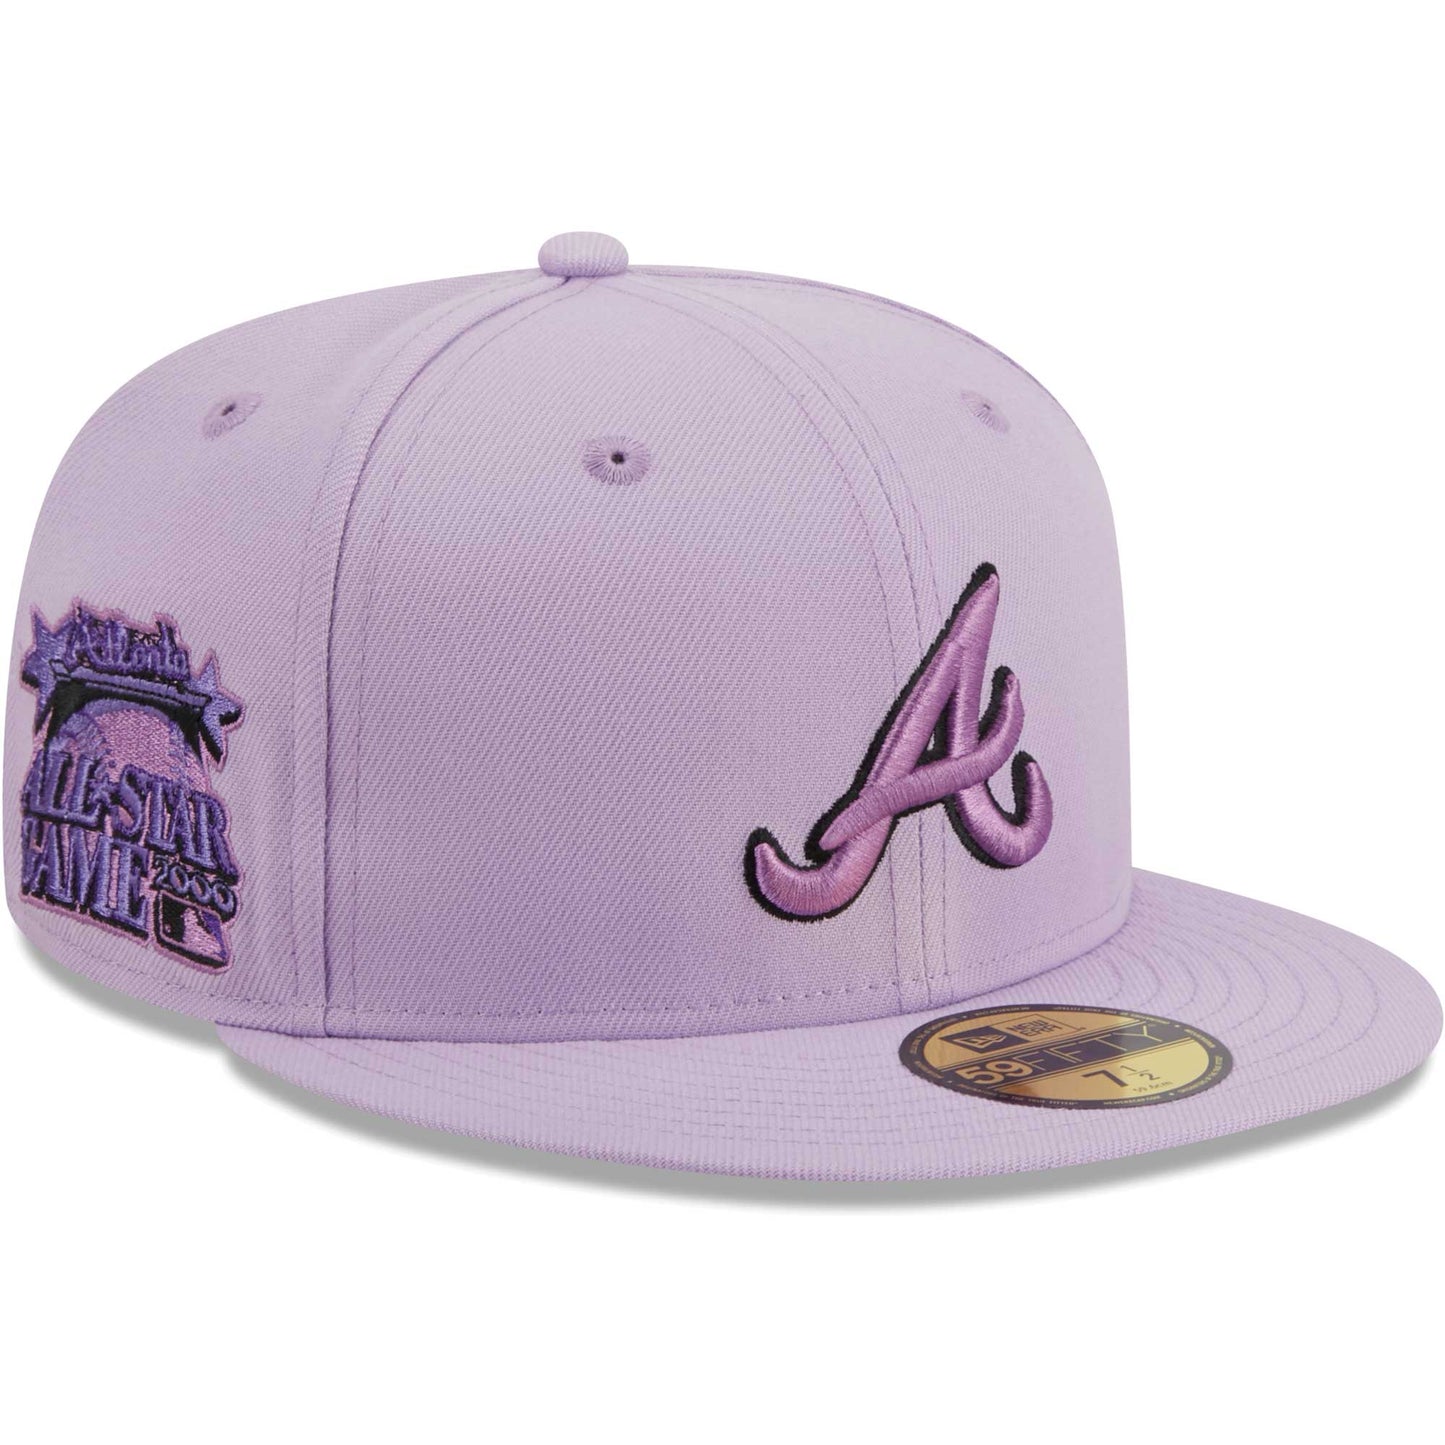 Atlanta Braves New Era 59FIFTY Fitted Hat - Lavender